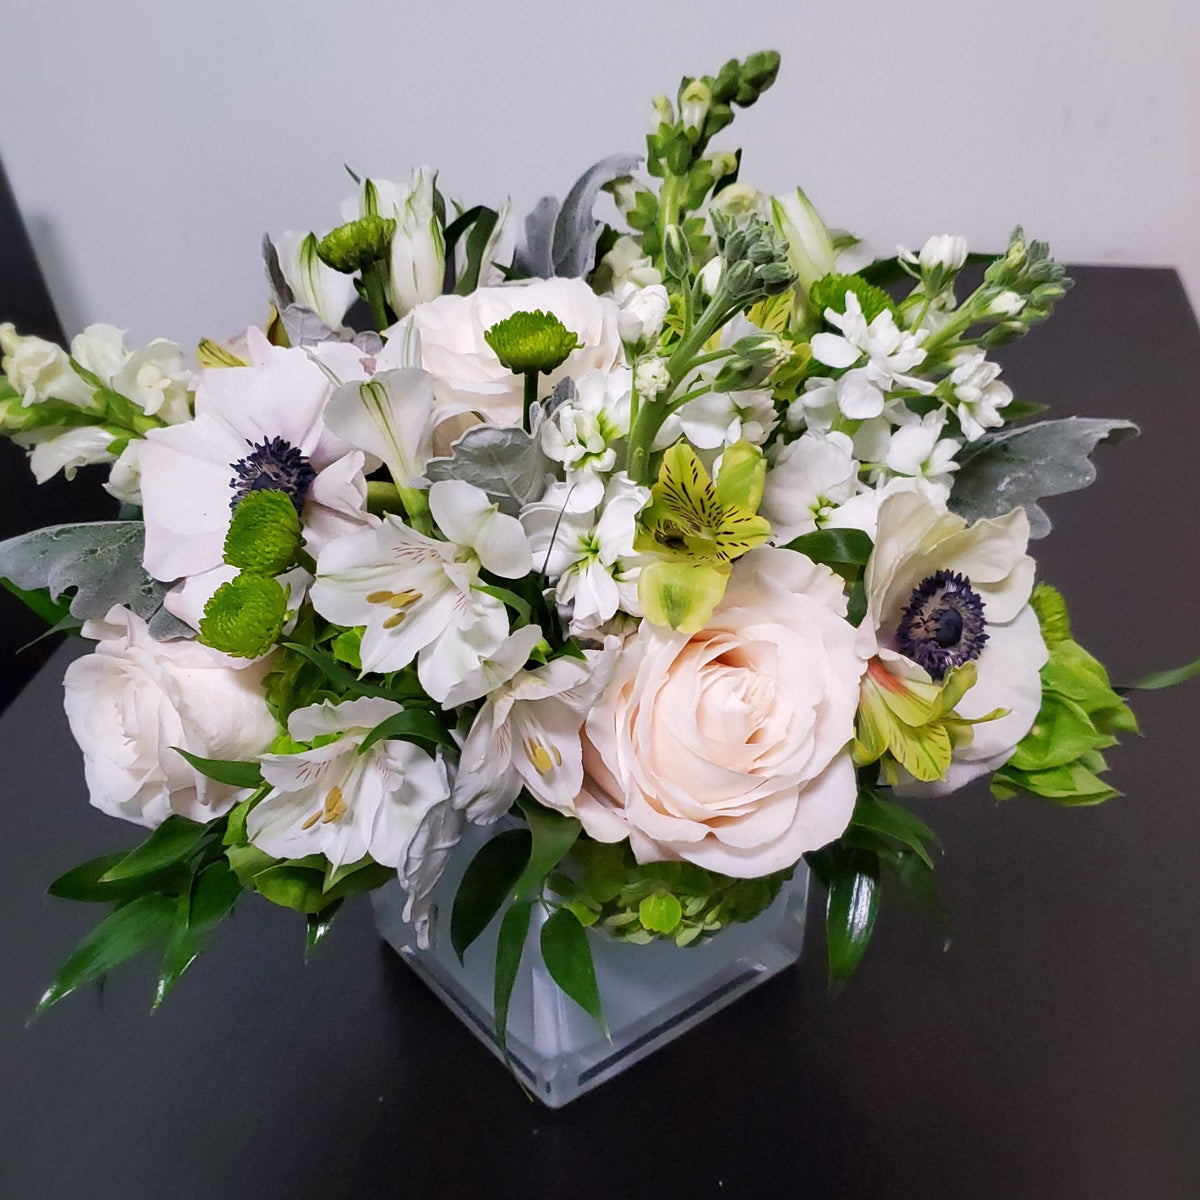 Table arrangement in white and green colors